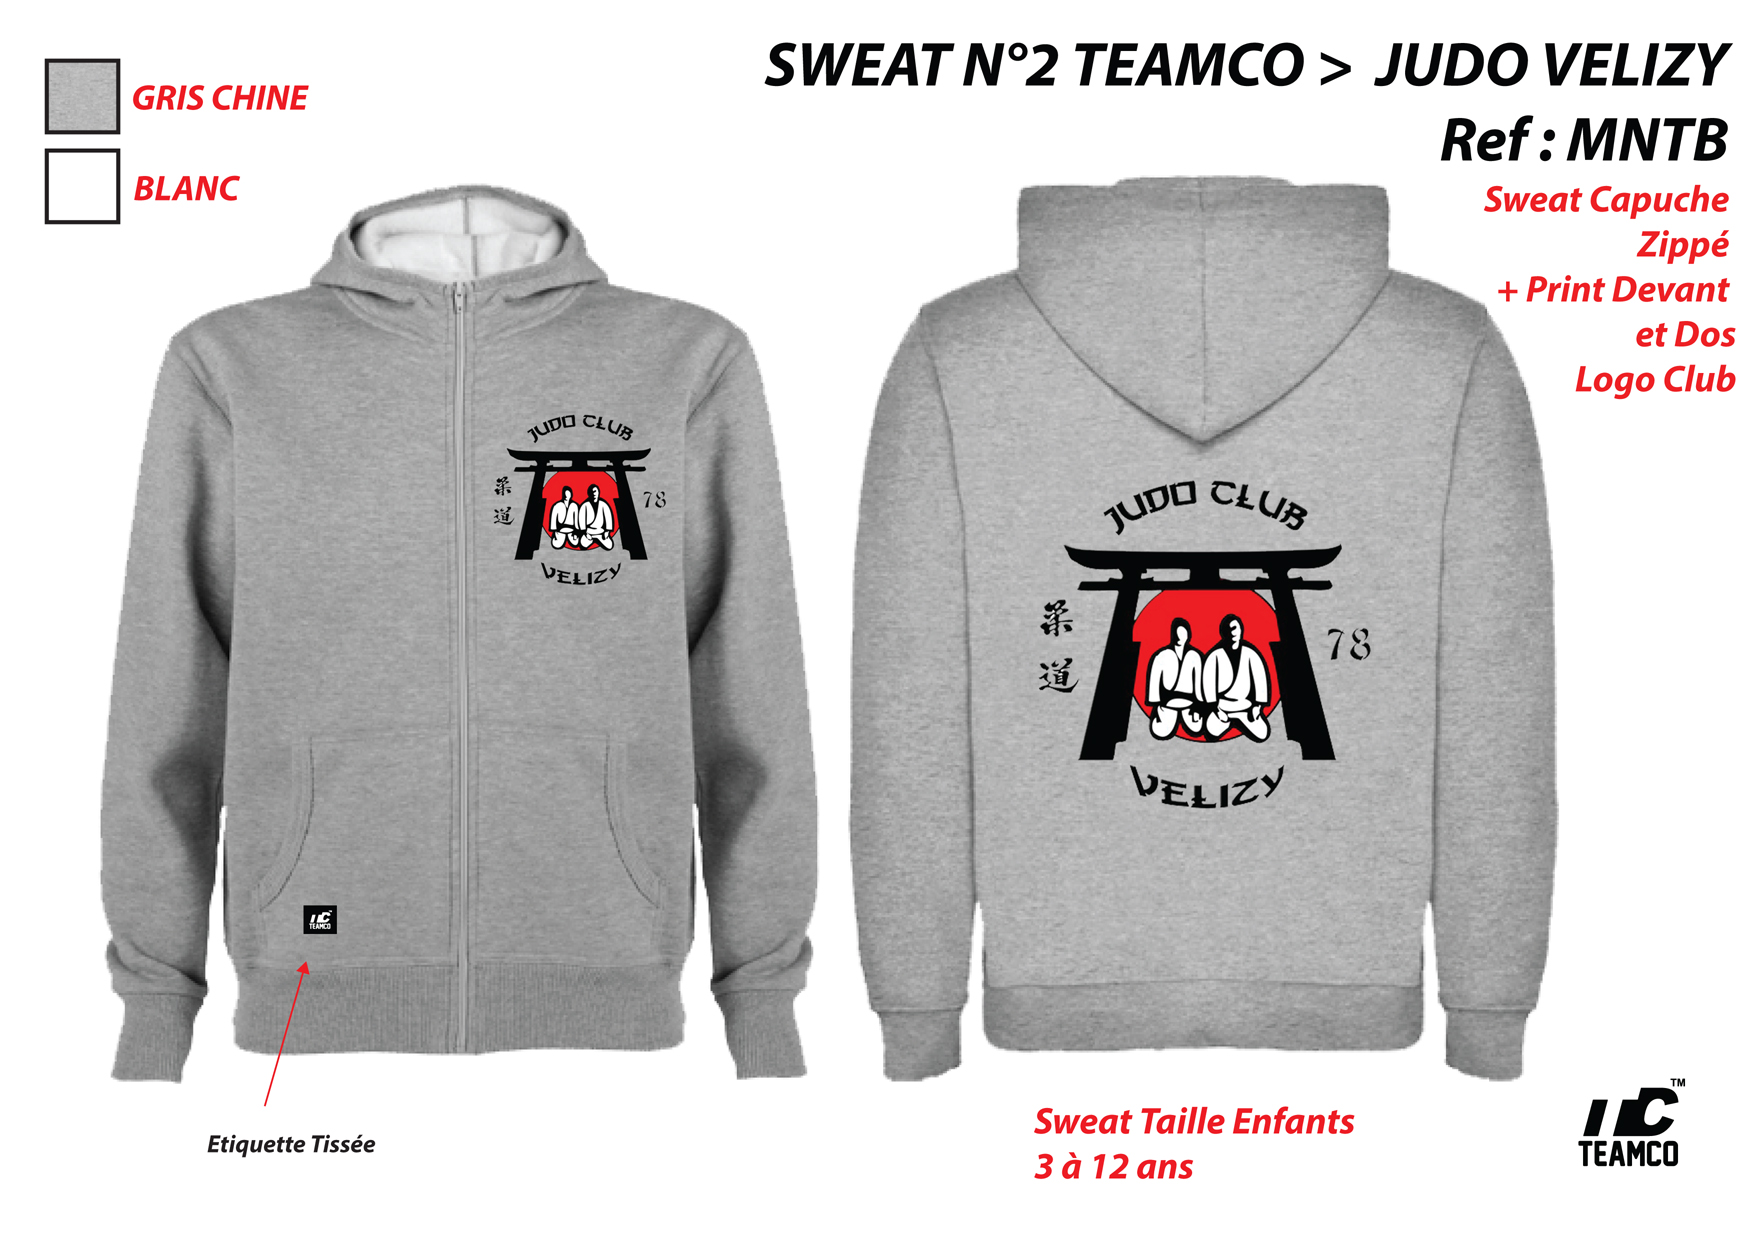 FT SWEAT TEAMCO-JUDO VELIZY_02